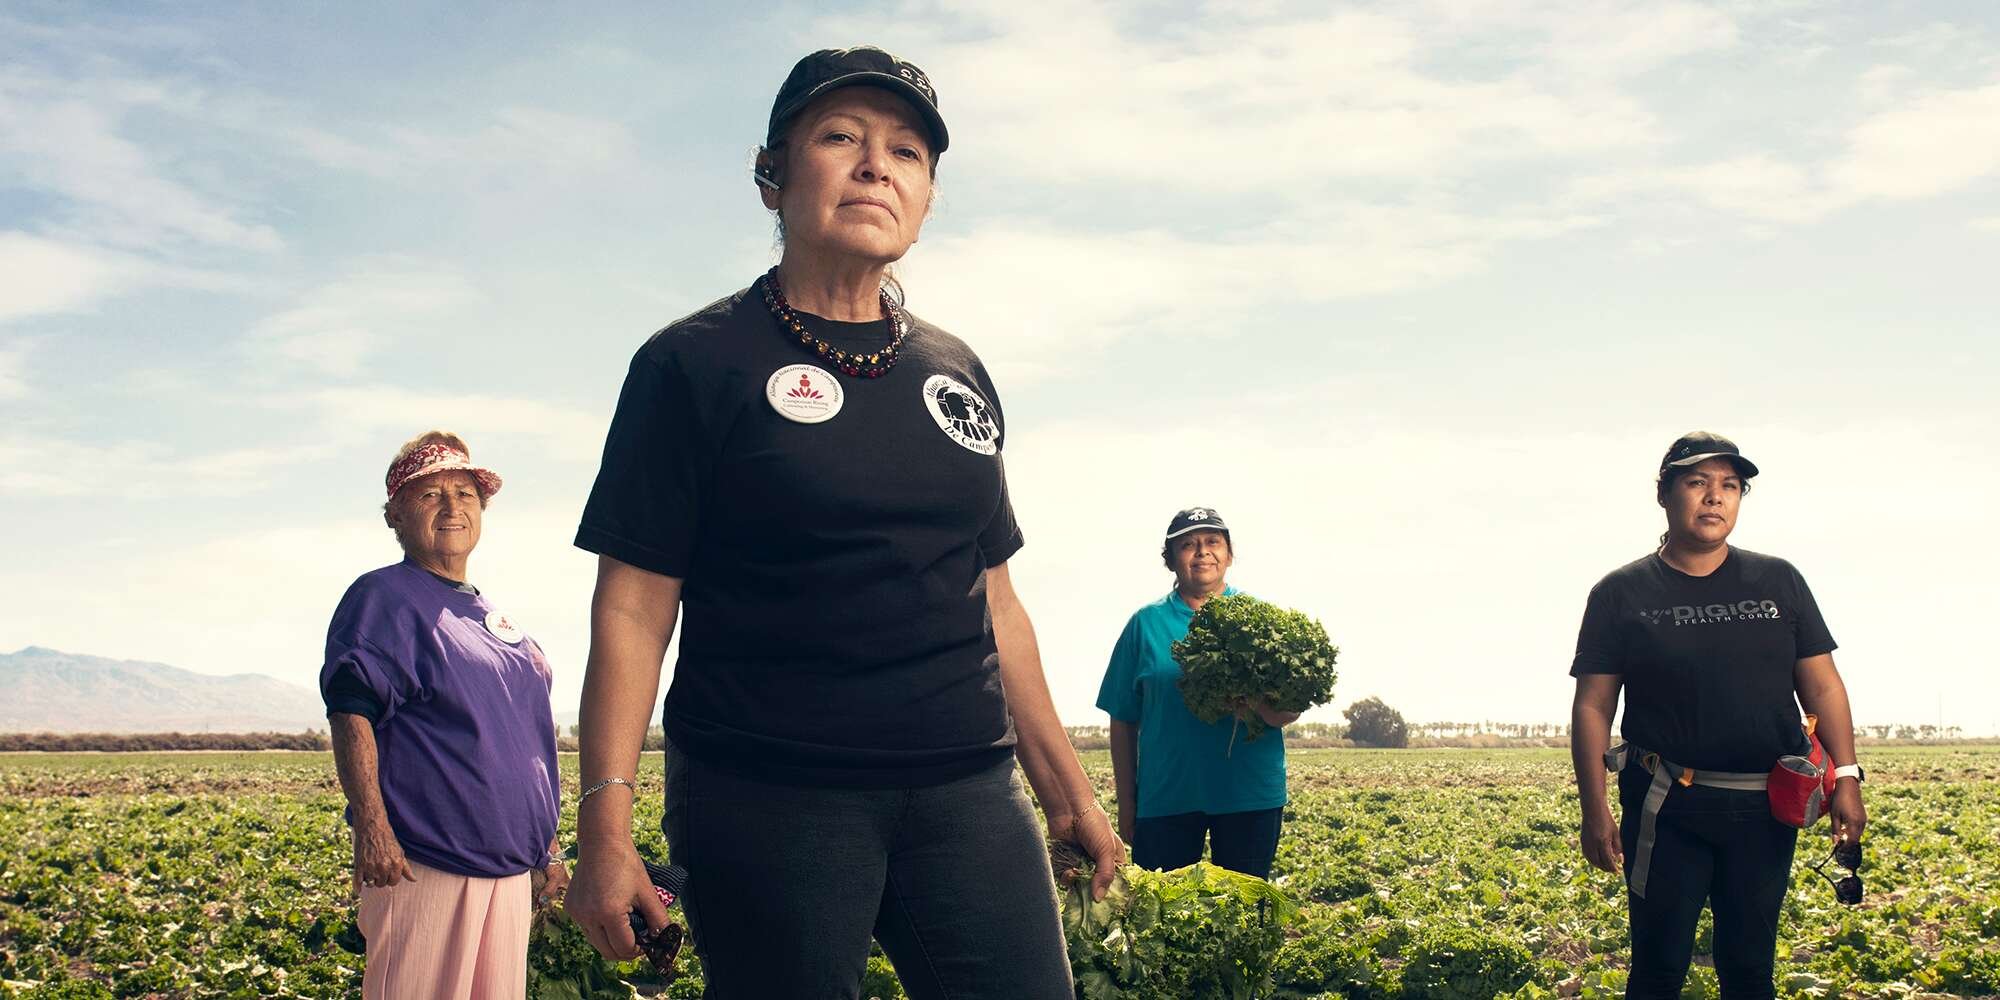 How One Woman Is Advocating for the Health, Safety & Rights of Migrant Farm Workers